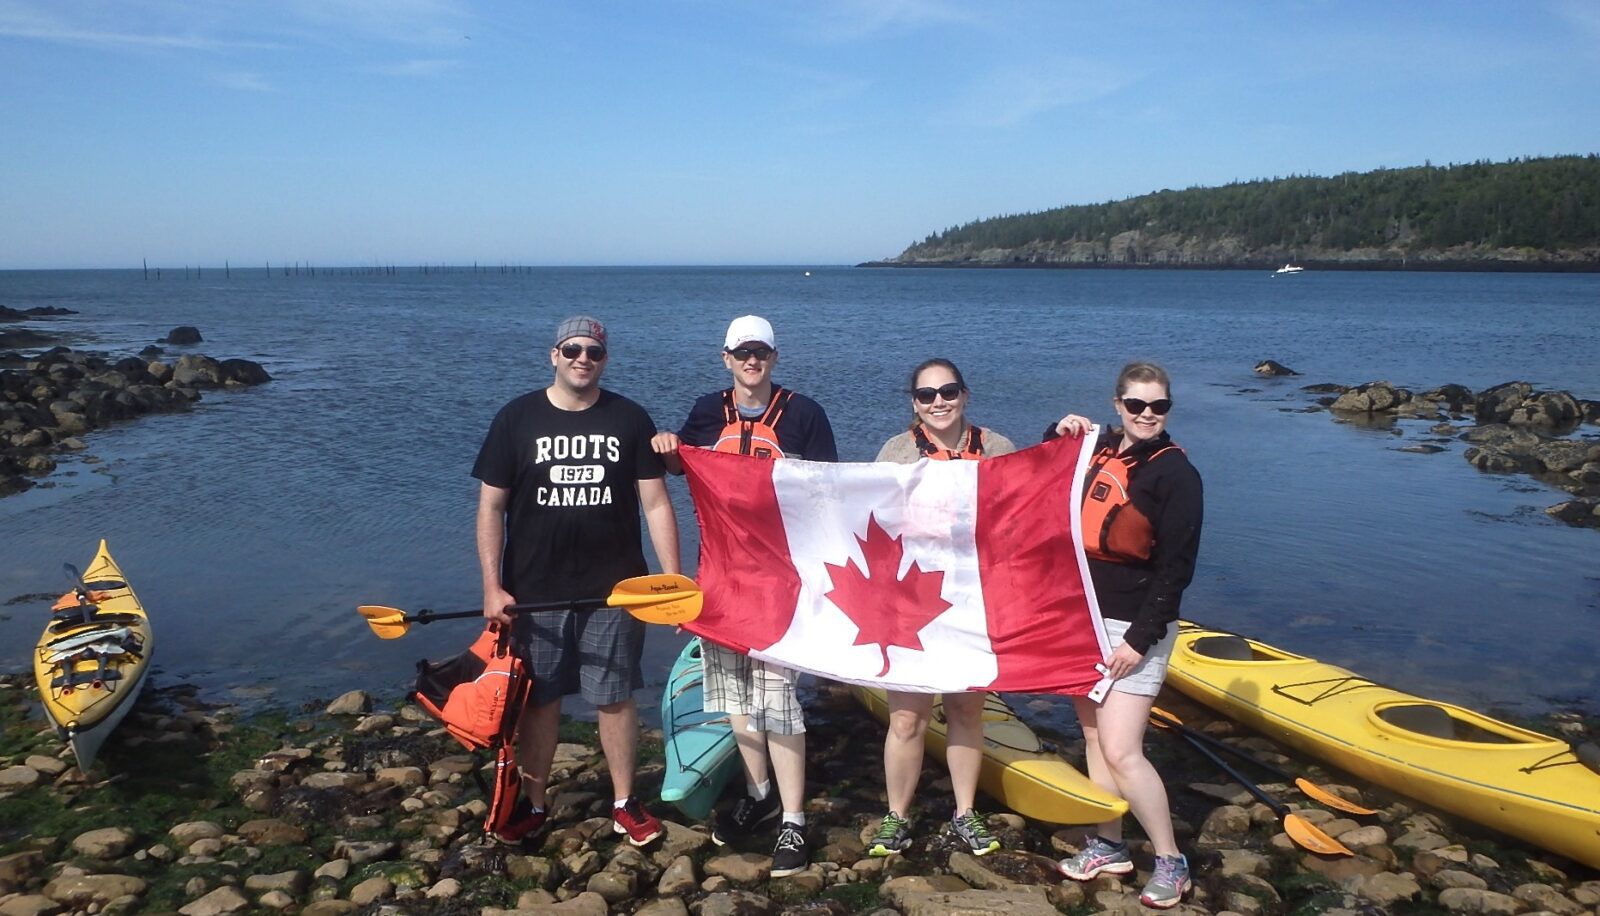 A group of people holding a canadian flag in front of a body of water.